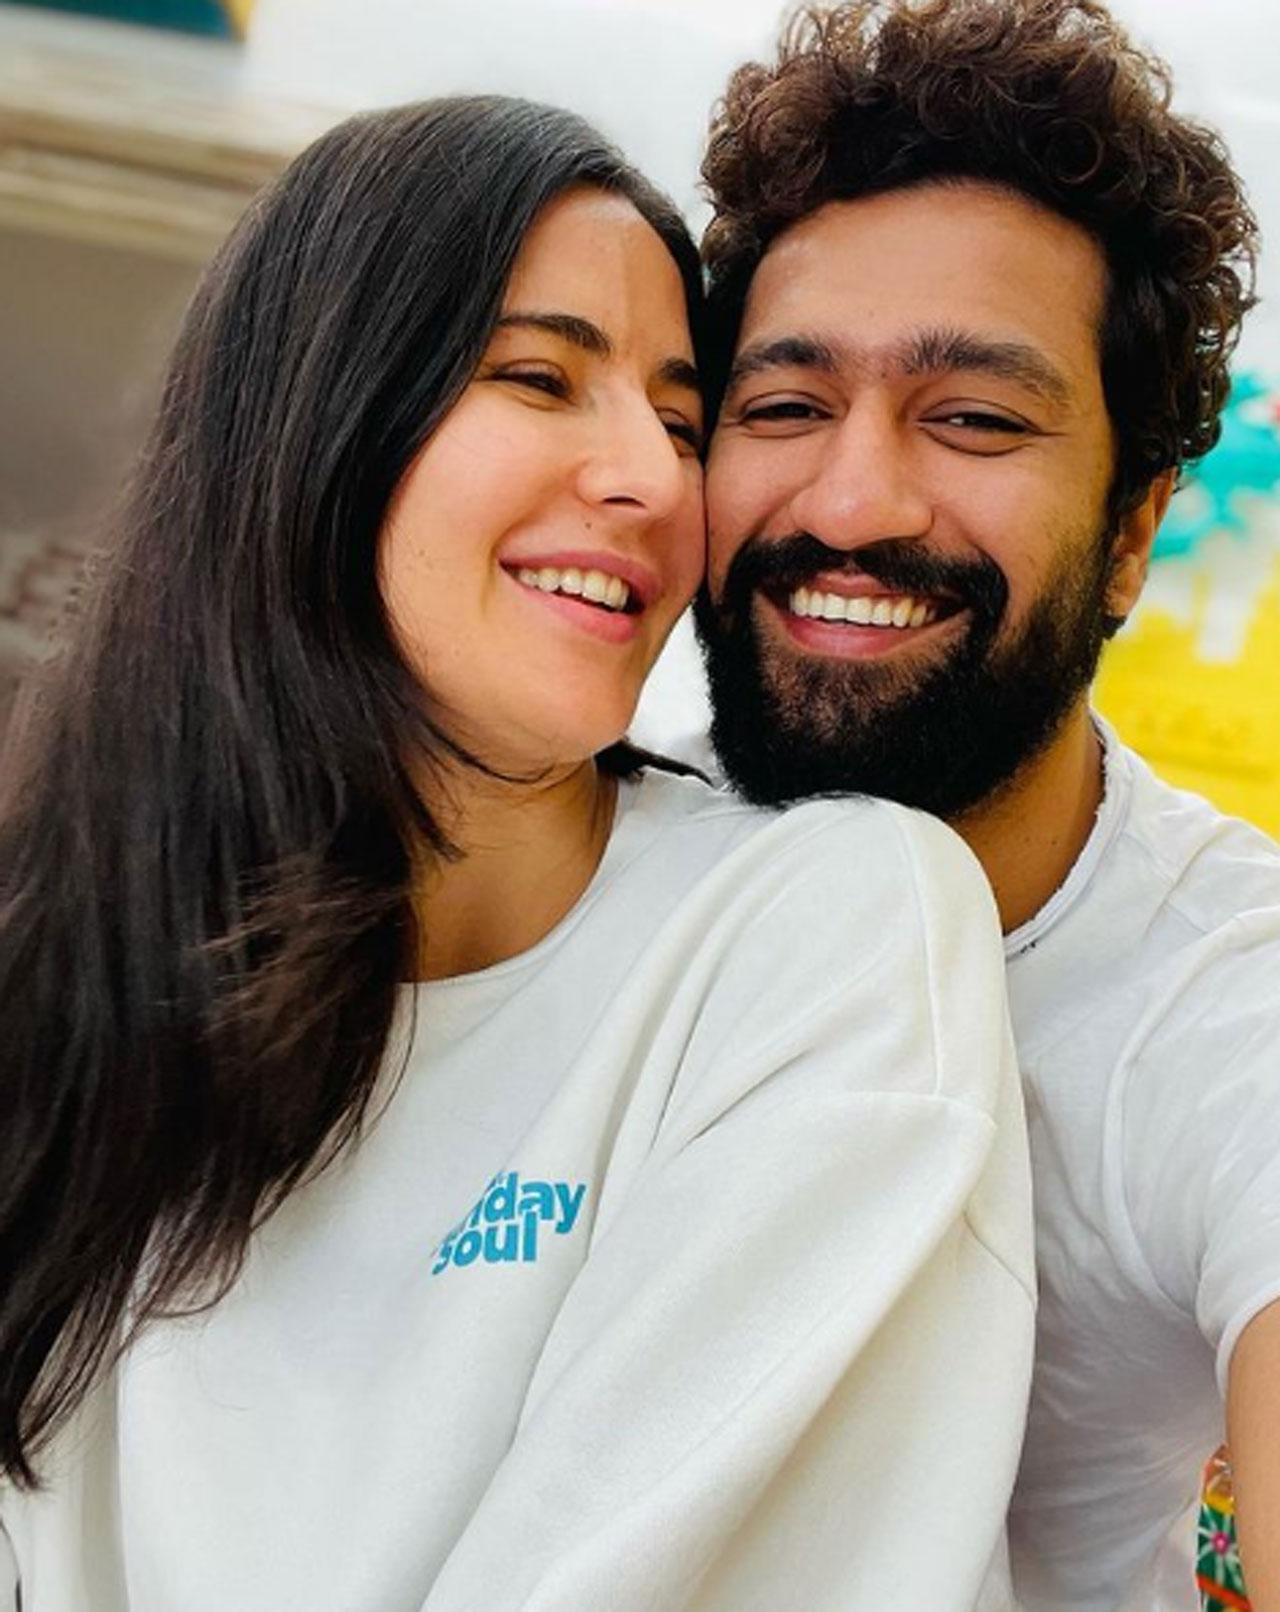 It was the Valentine's Day and the two clicked an adorable selfie and the actor wrote- 